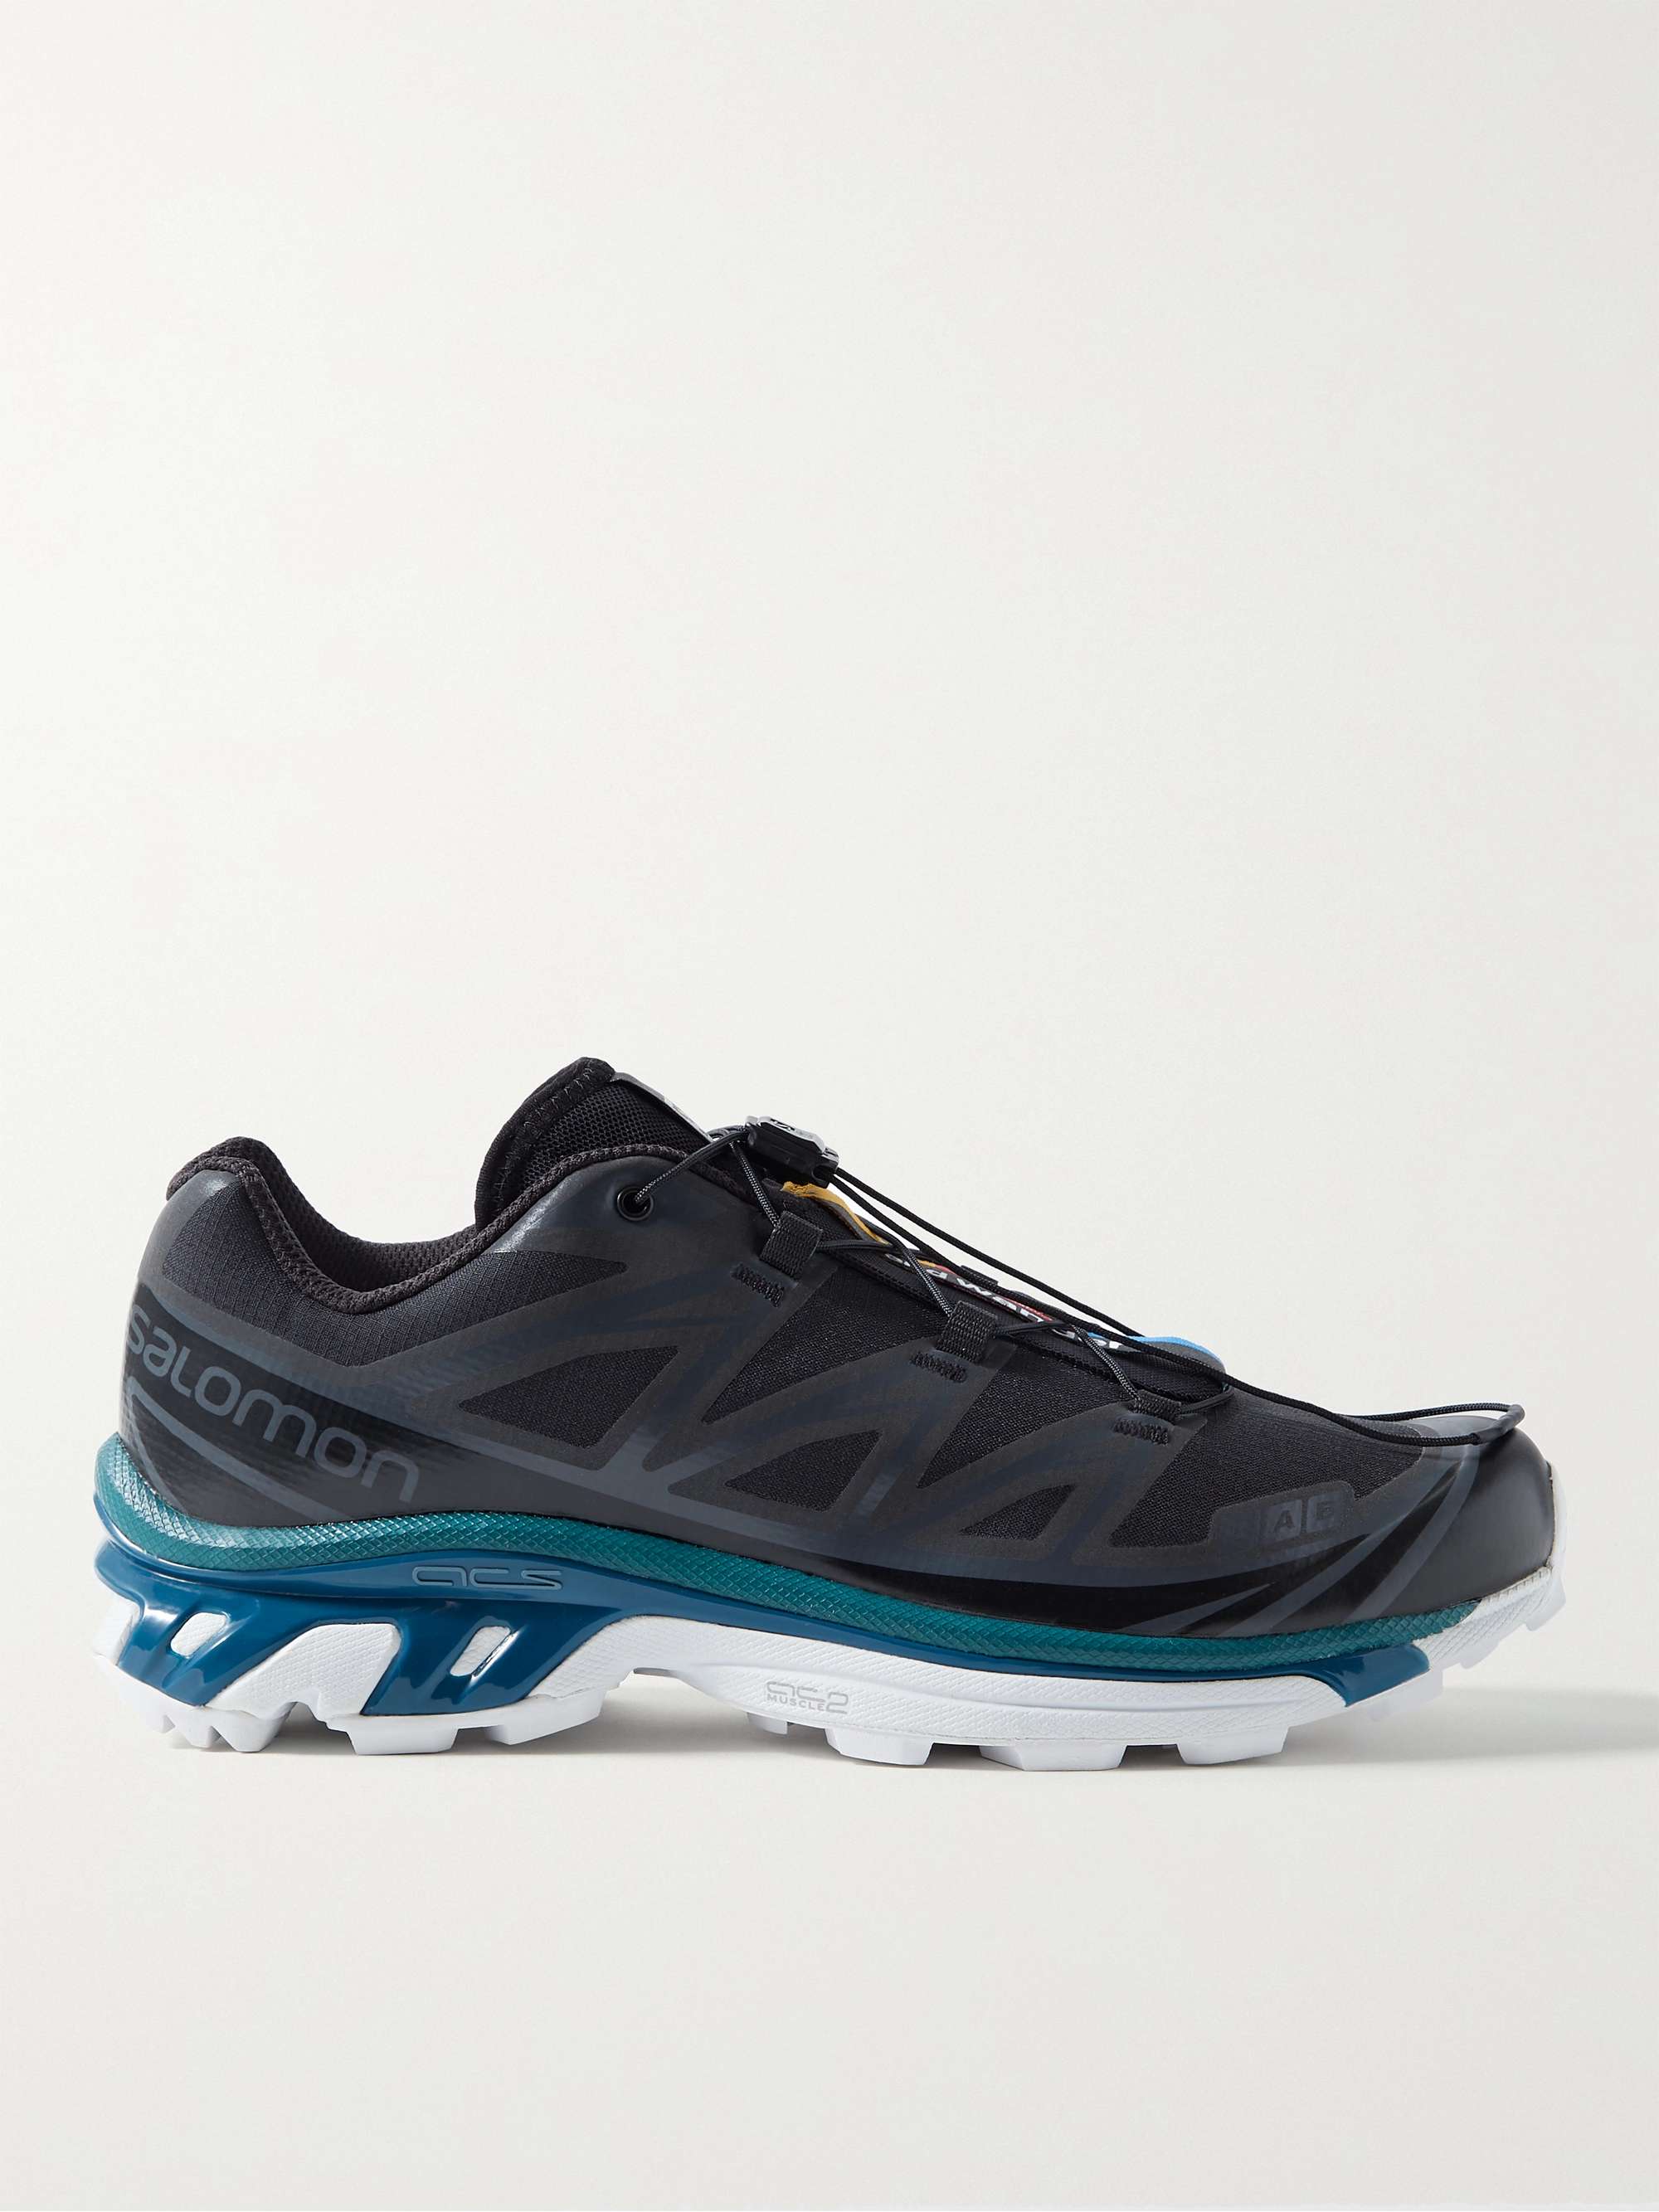 AND WANDER + Salomon XT-6 Ripstop and Mesh Trail Running Sneakers